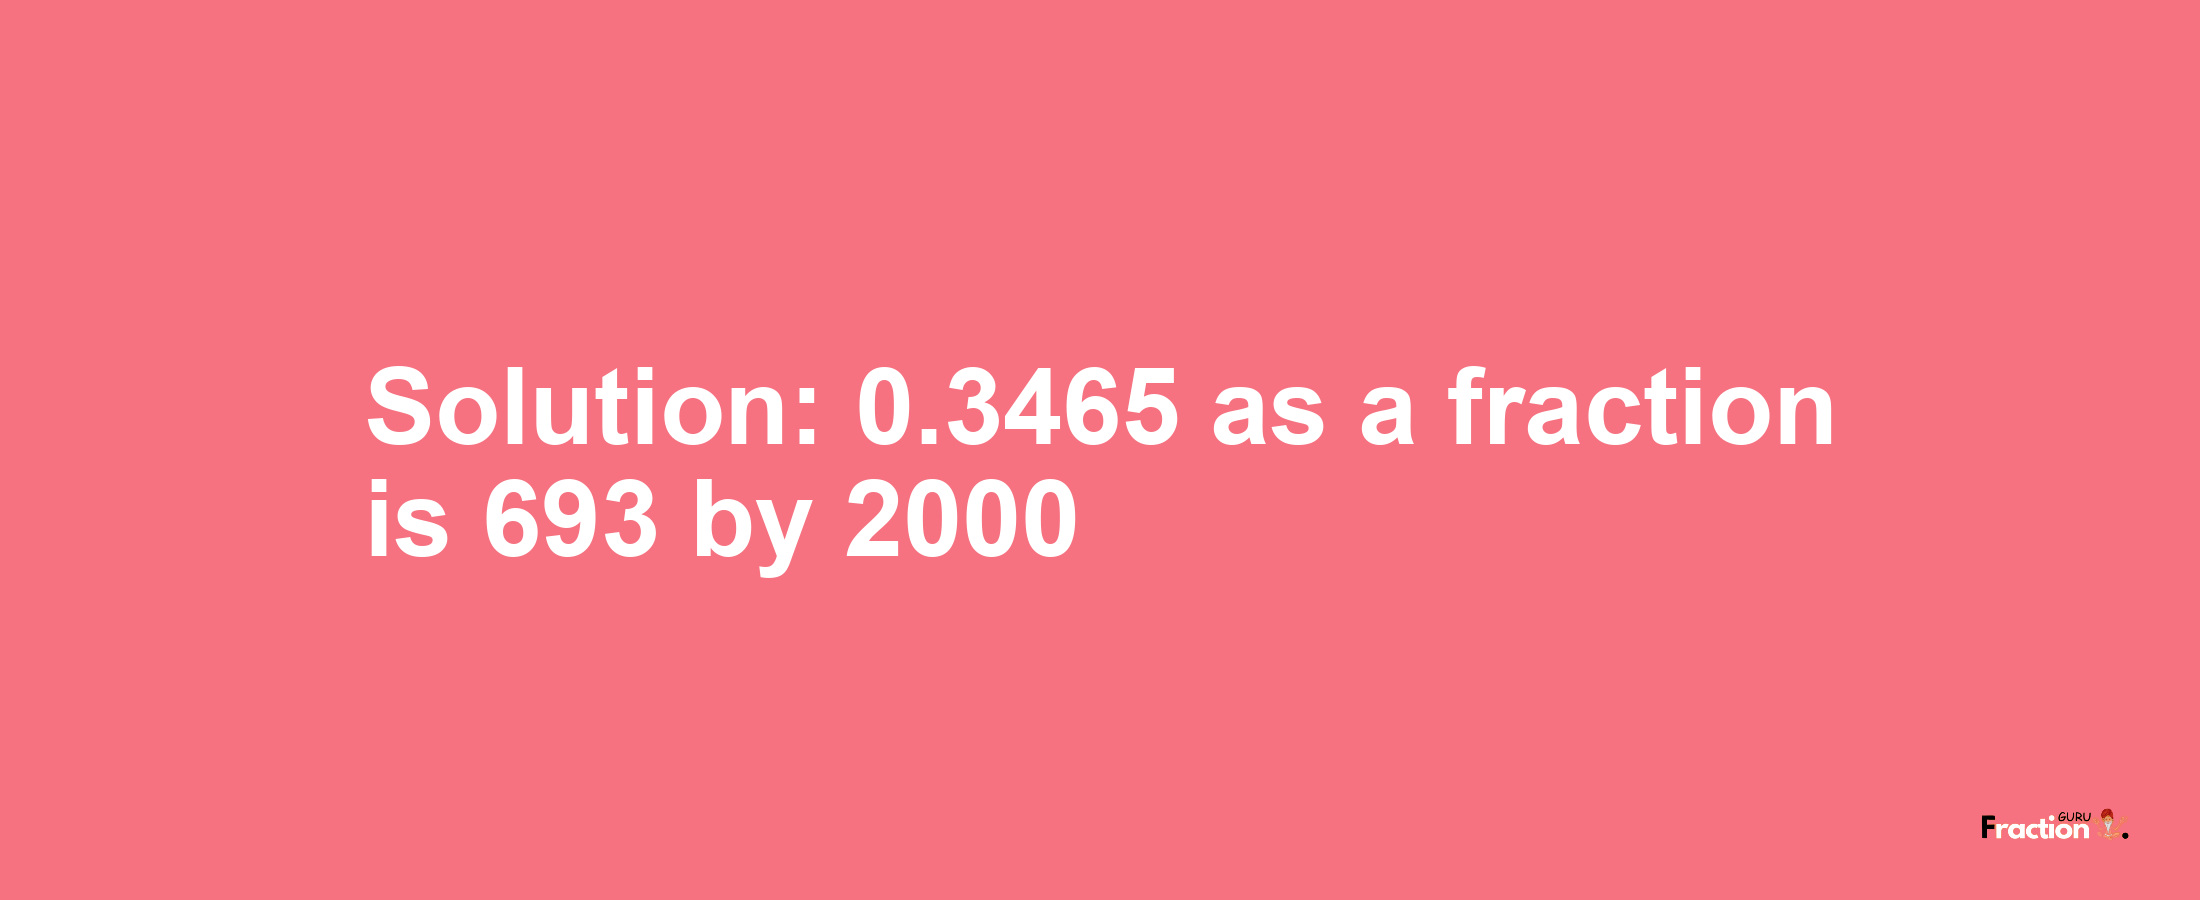 Solution:0.3465 as a fraction is 693/2000